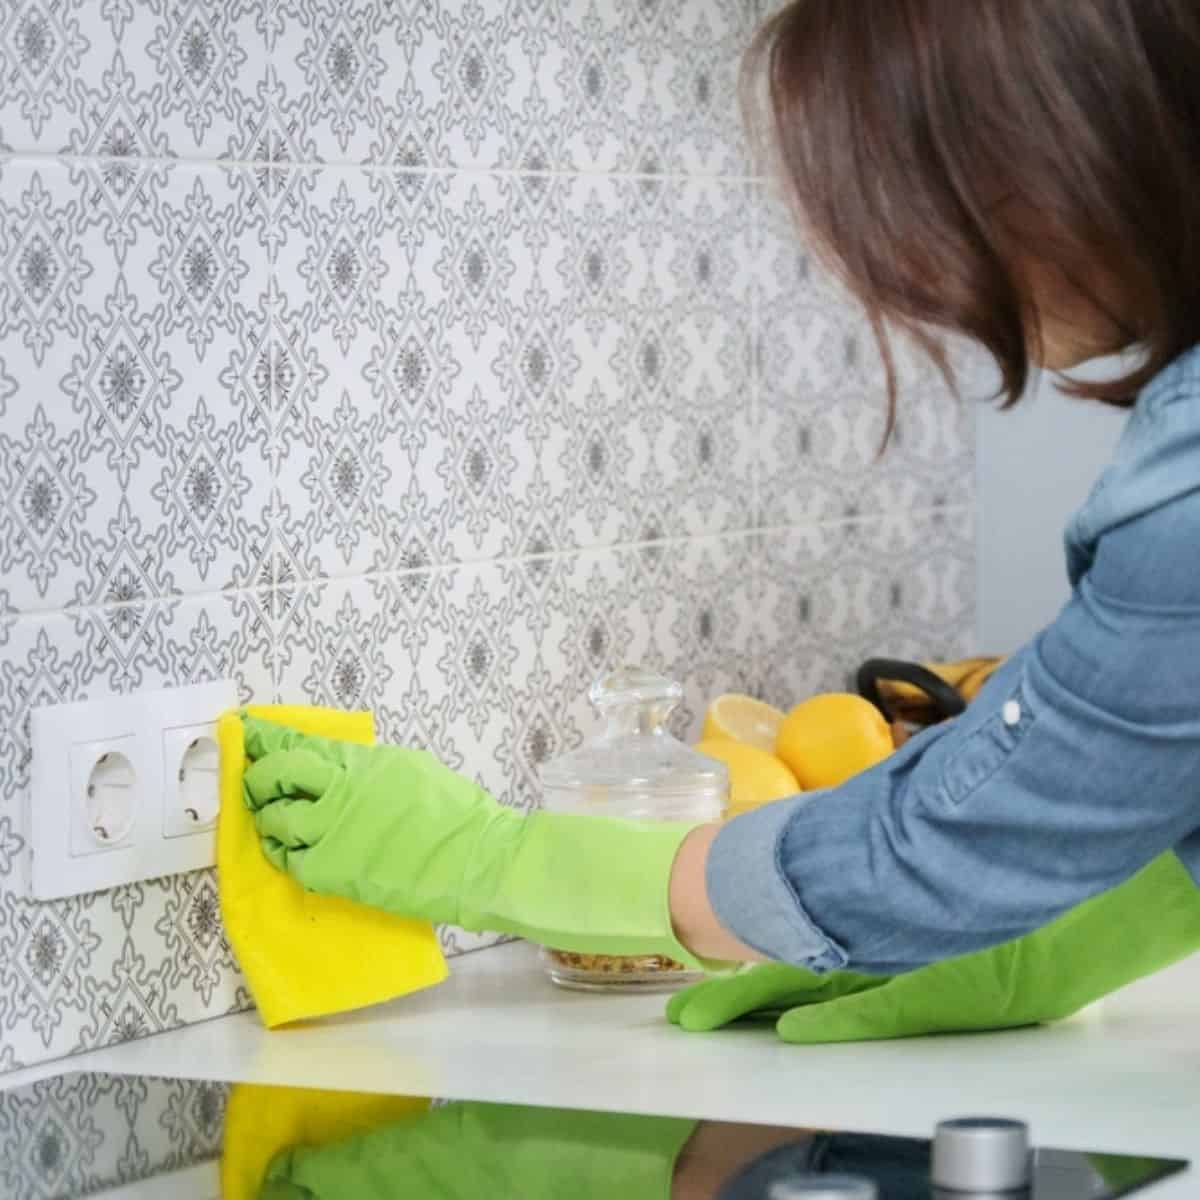 https://www.savvyhoney.com/wp-content/uploads/2021/05/how-to-clean-a-messy-house-step-by-step.jpg